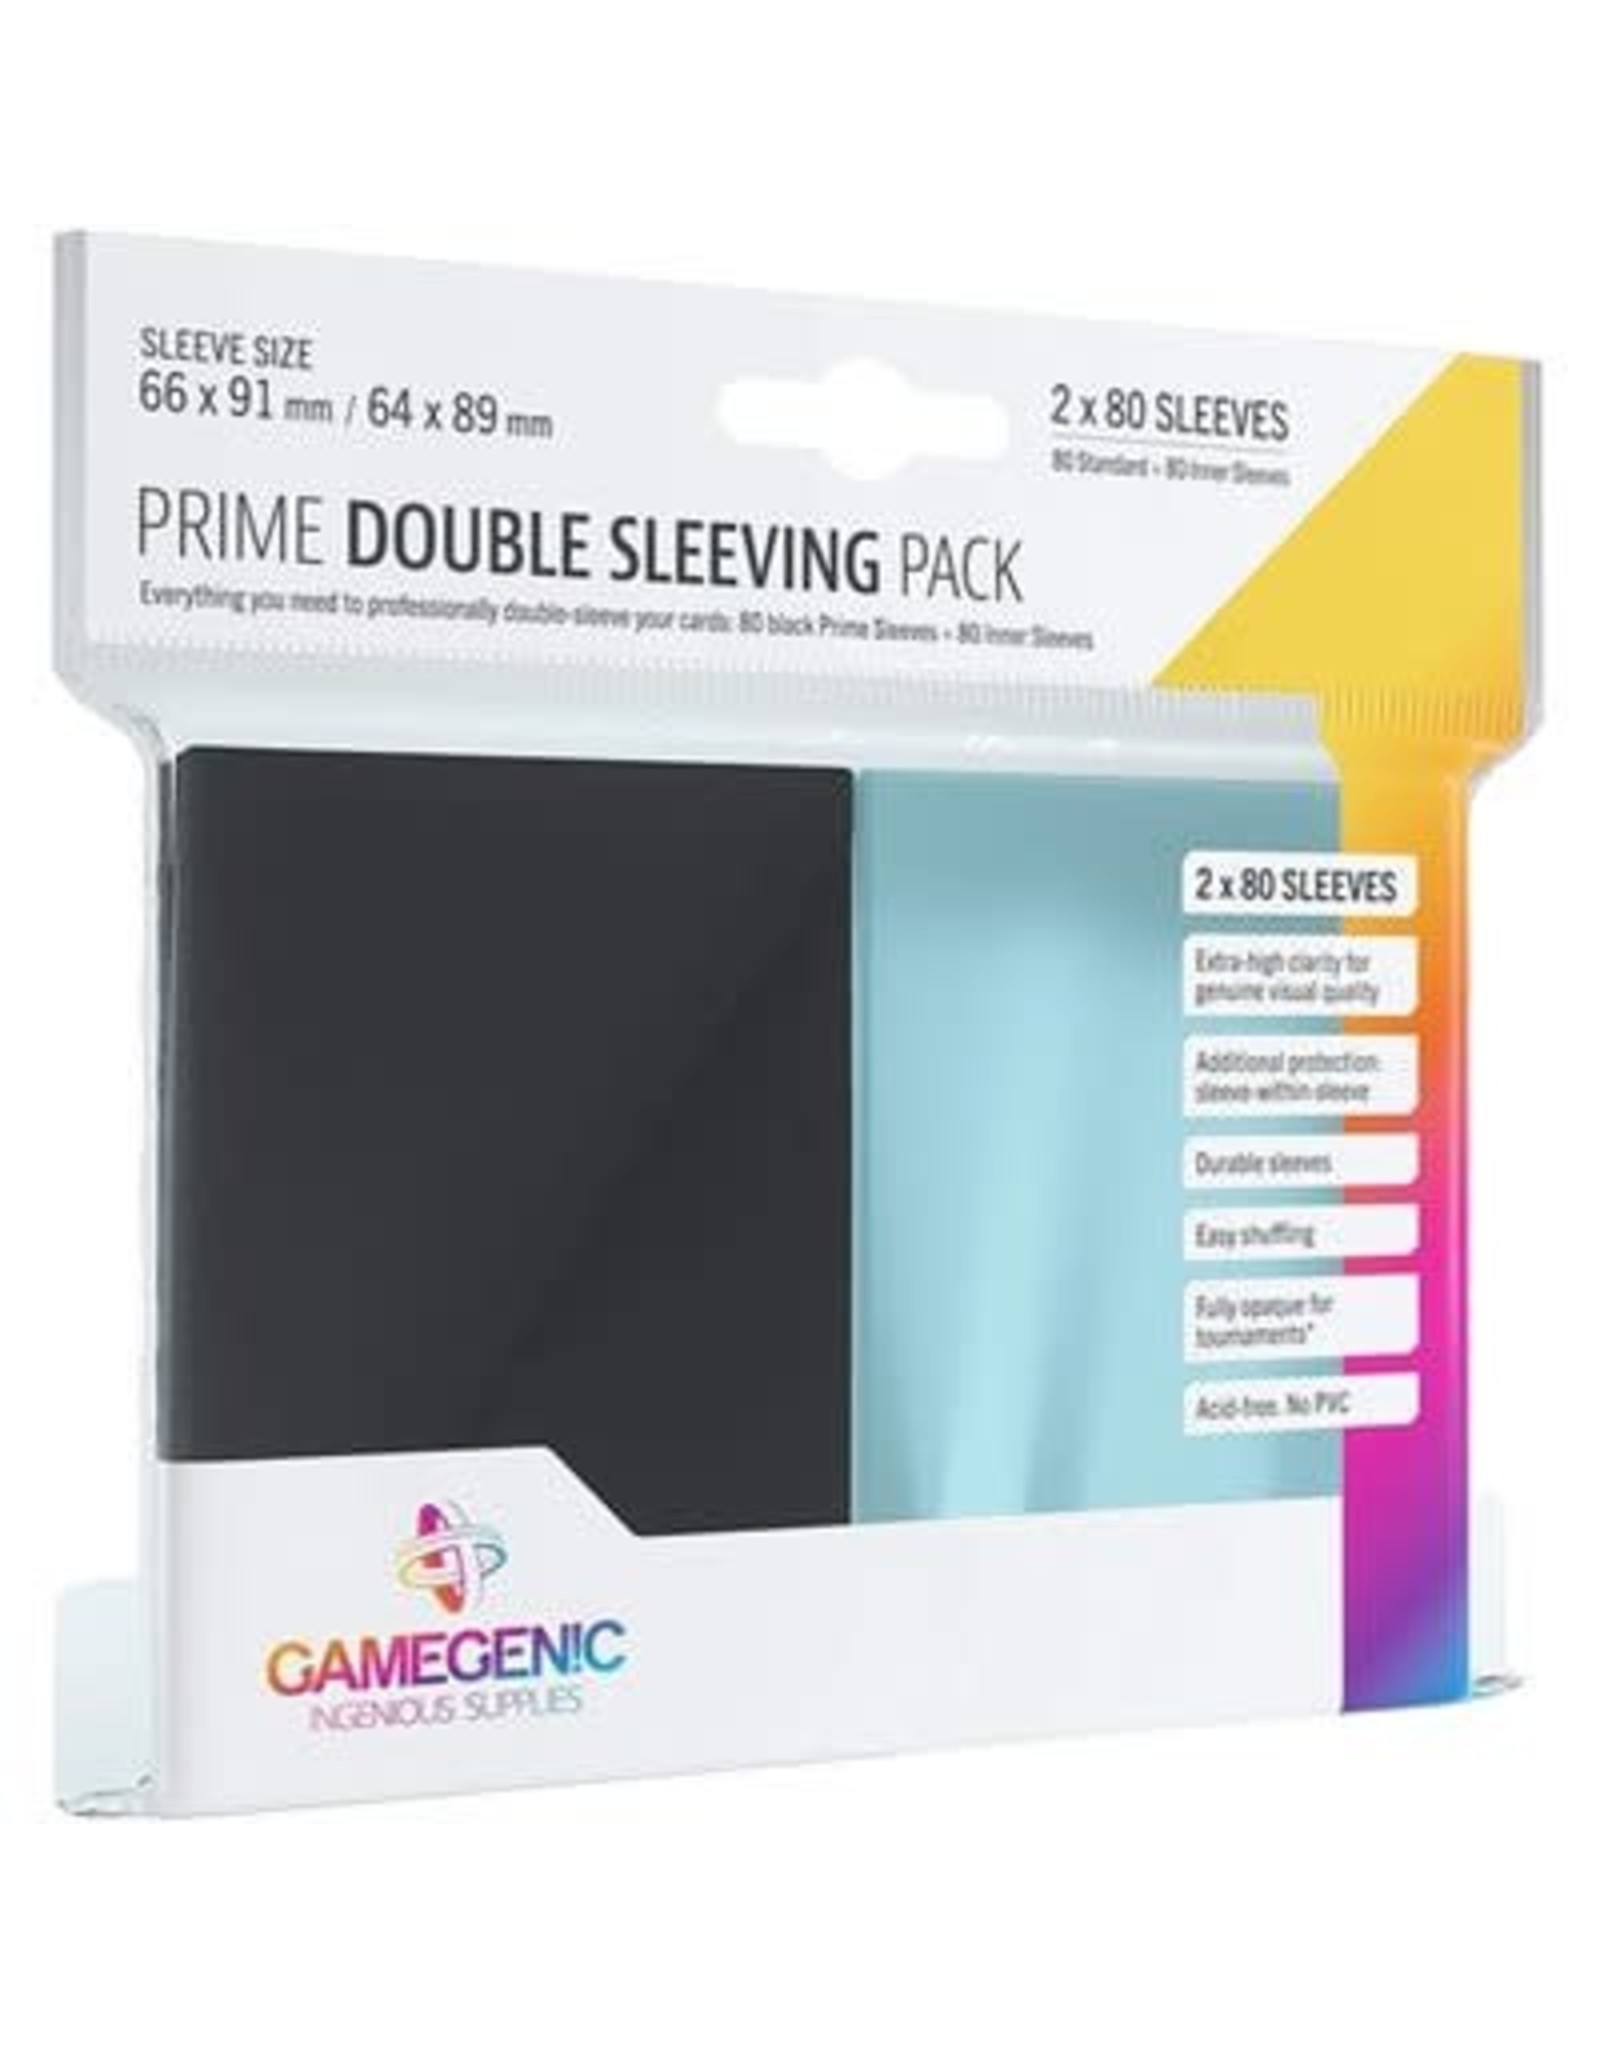 GameGenic Gamegenic Double Sleeving Pack (2x80)